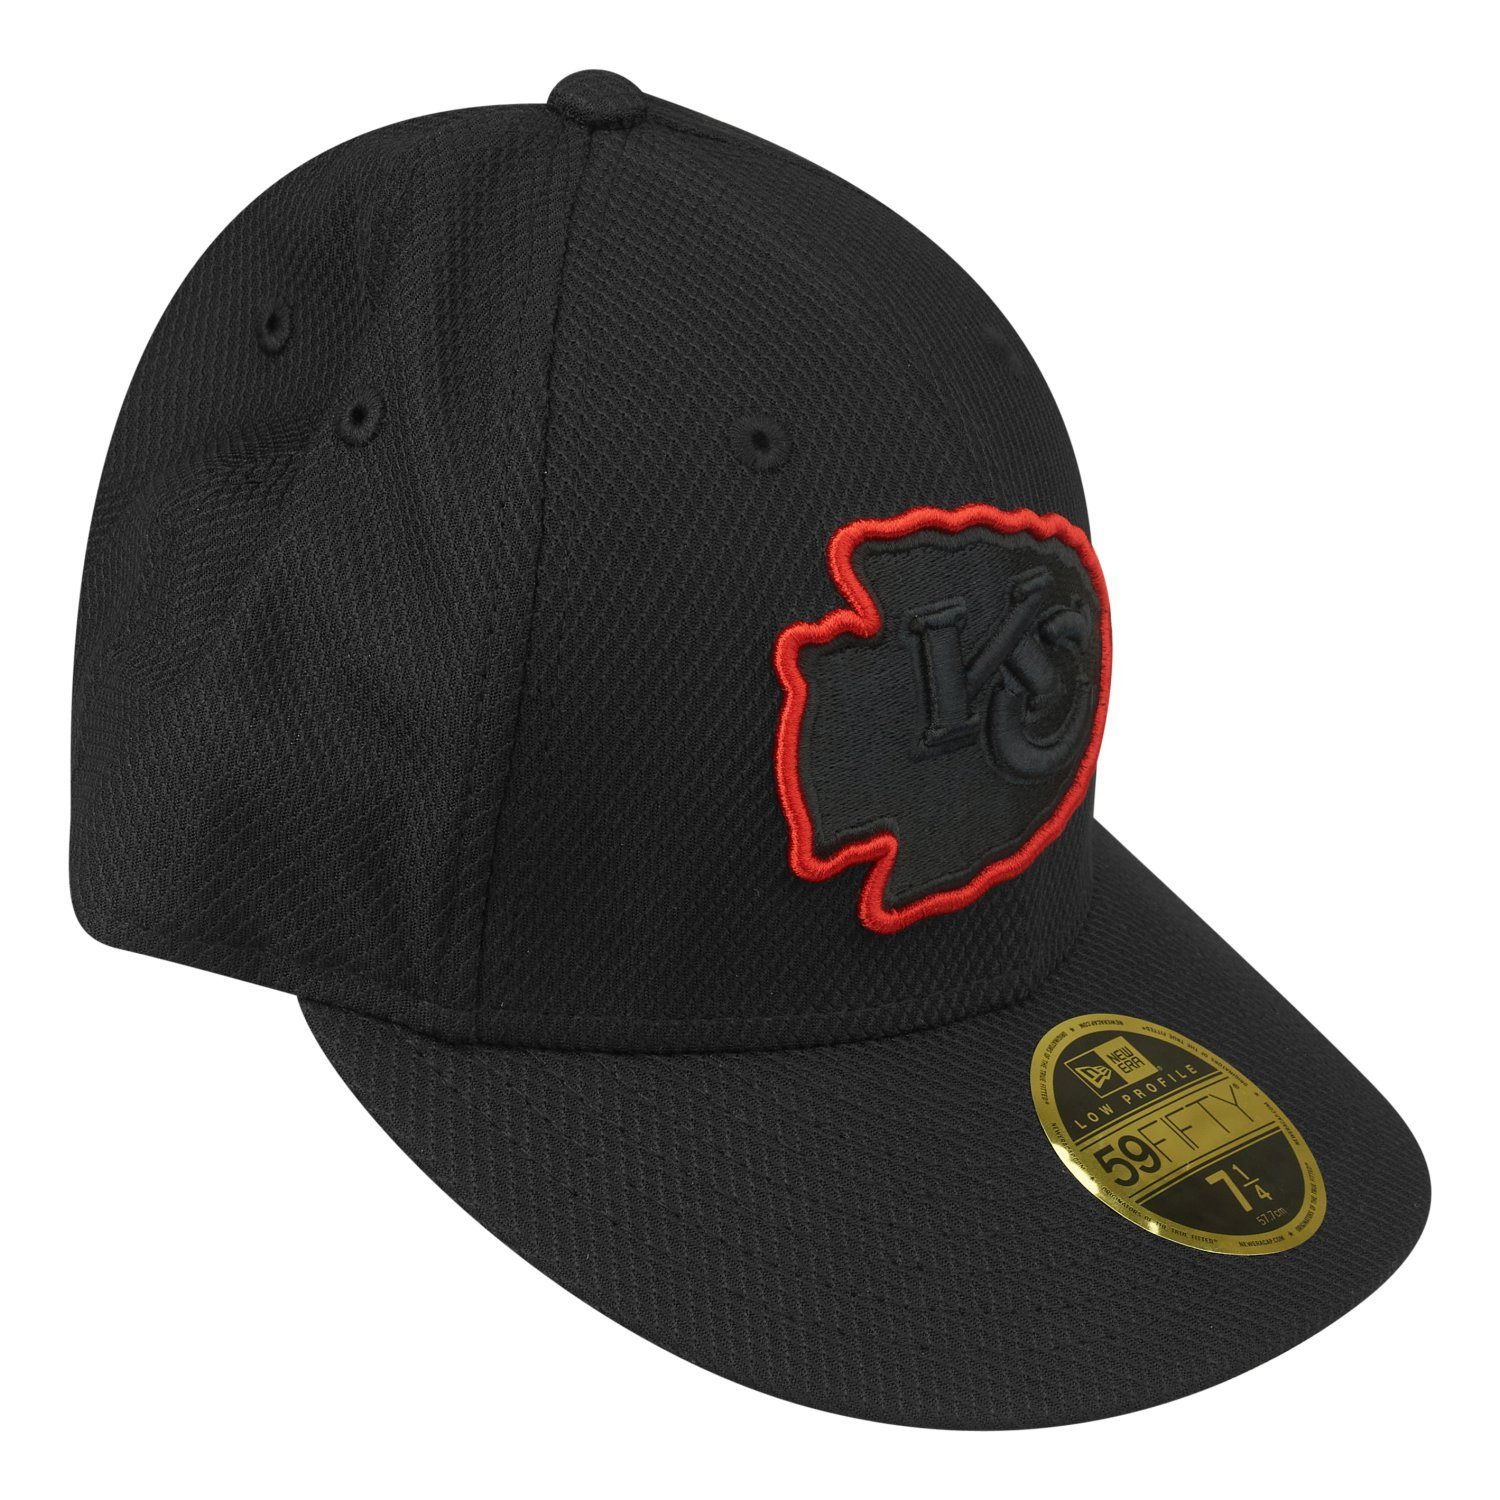 Fitted Era Chiefs Profile New Low 59Fifty Cap Kansas City